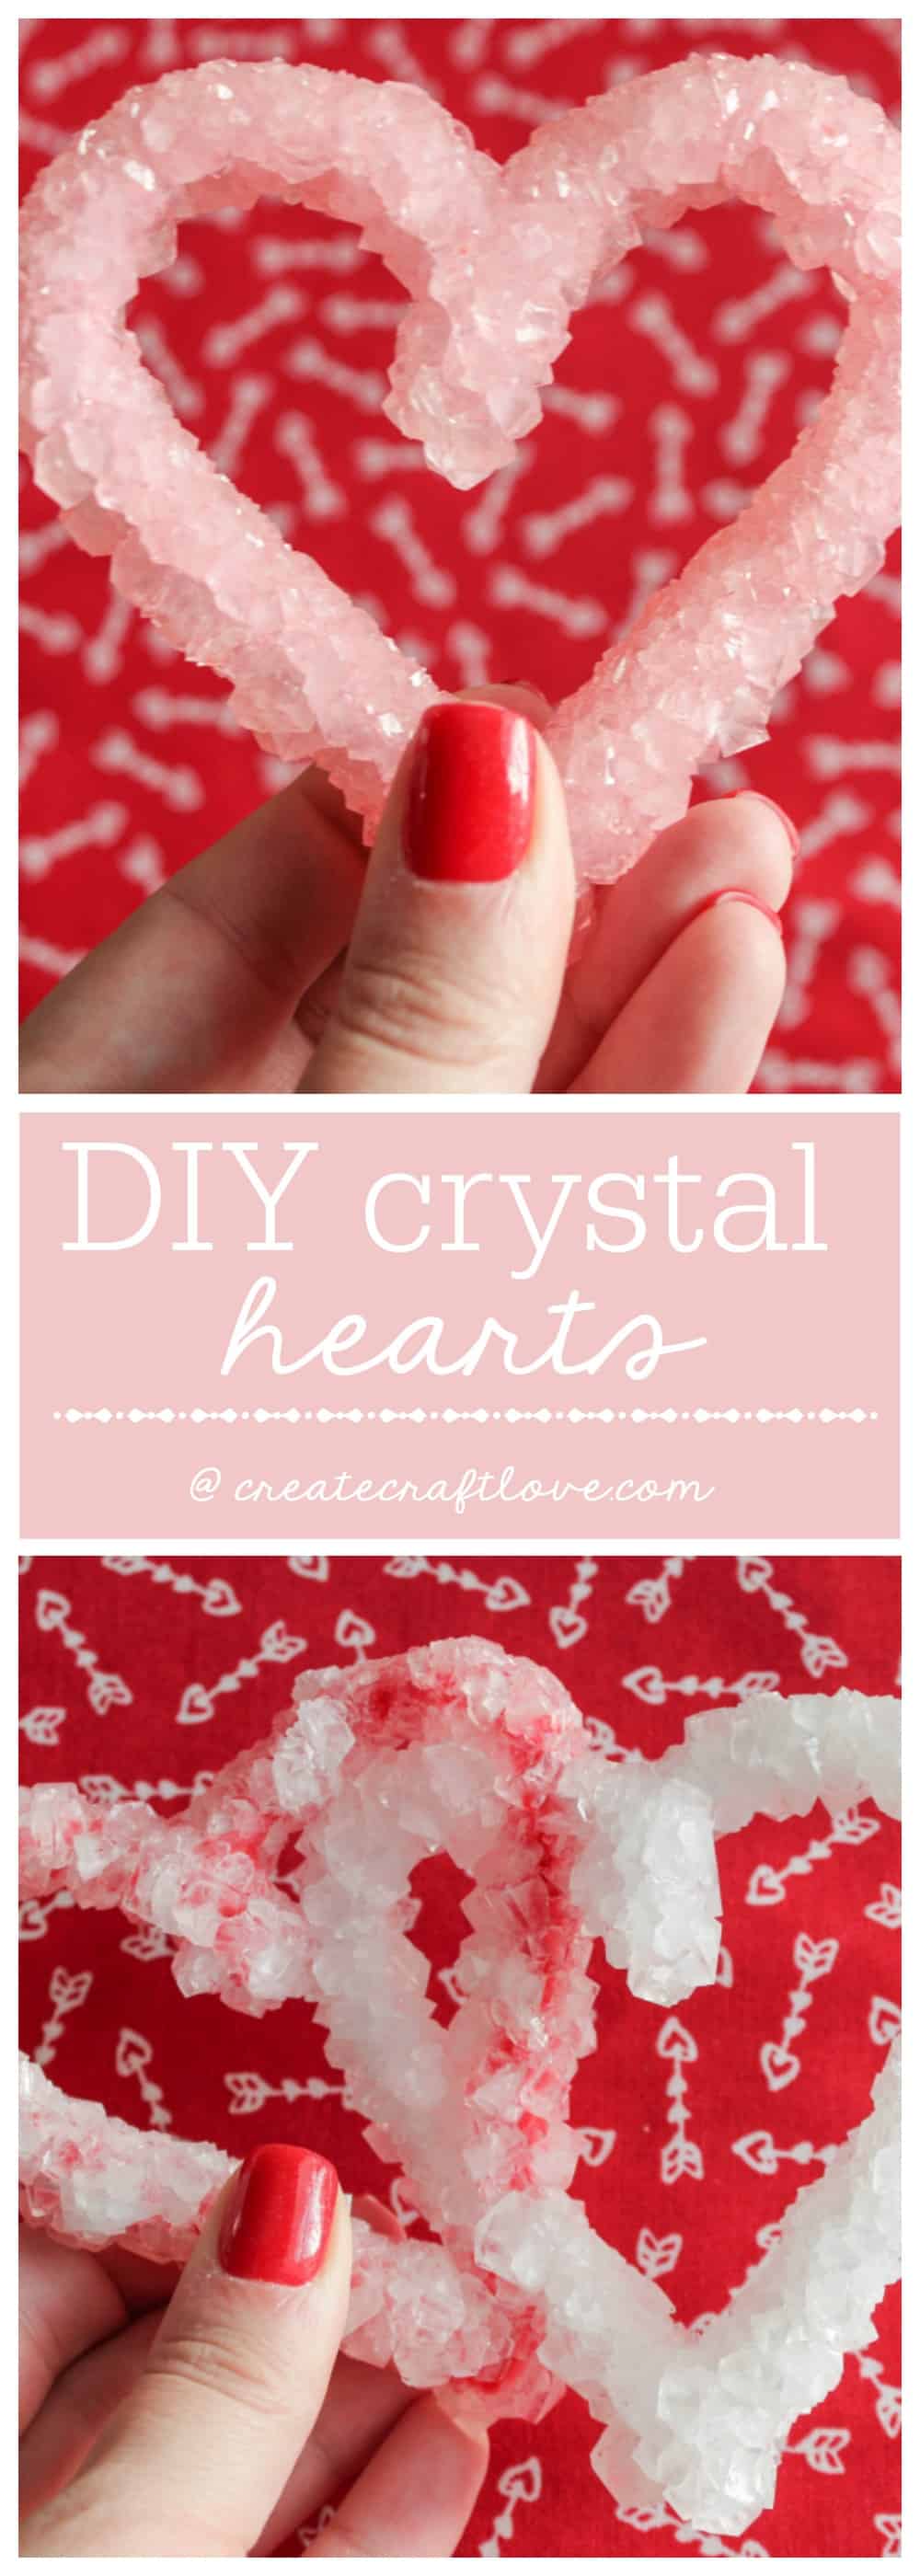 You can grow your own crystal hearts too by following these simple steps! via createcraftlovel.com